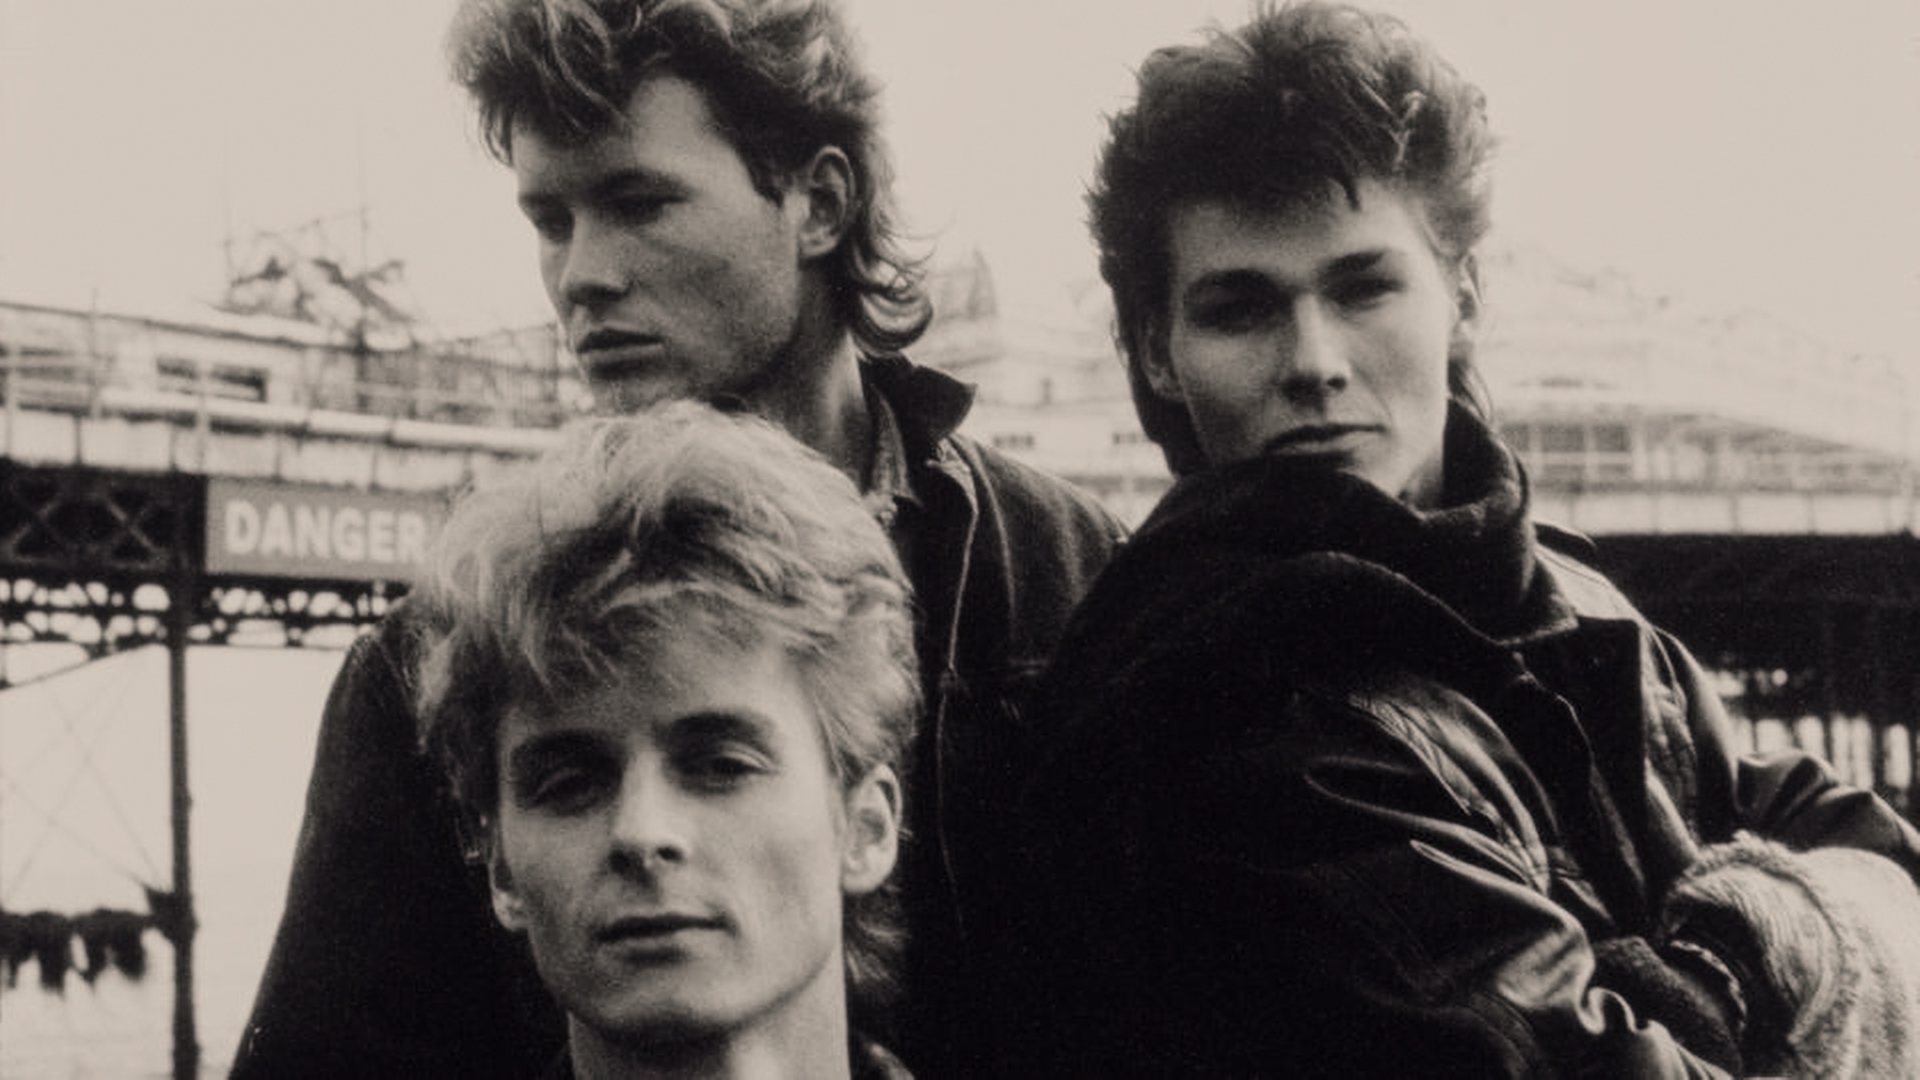 a-ha: The Movie takes on much more than the one song you know